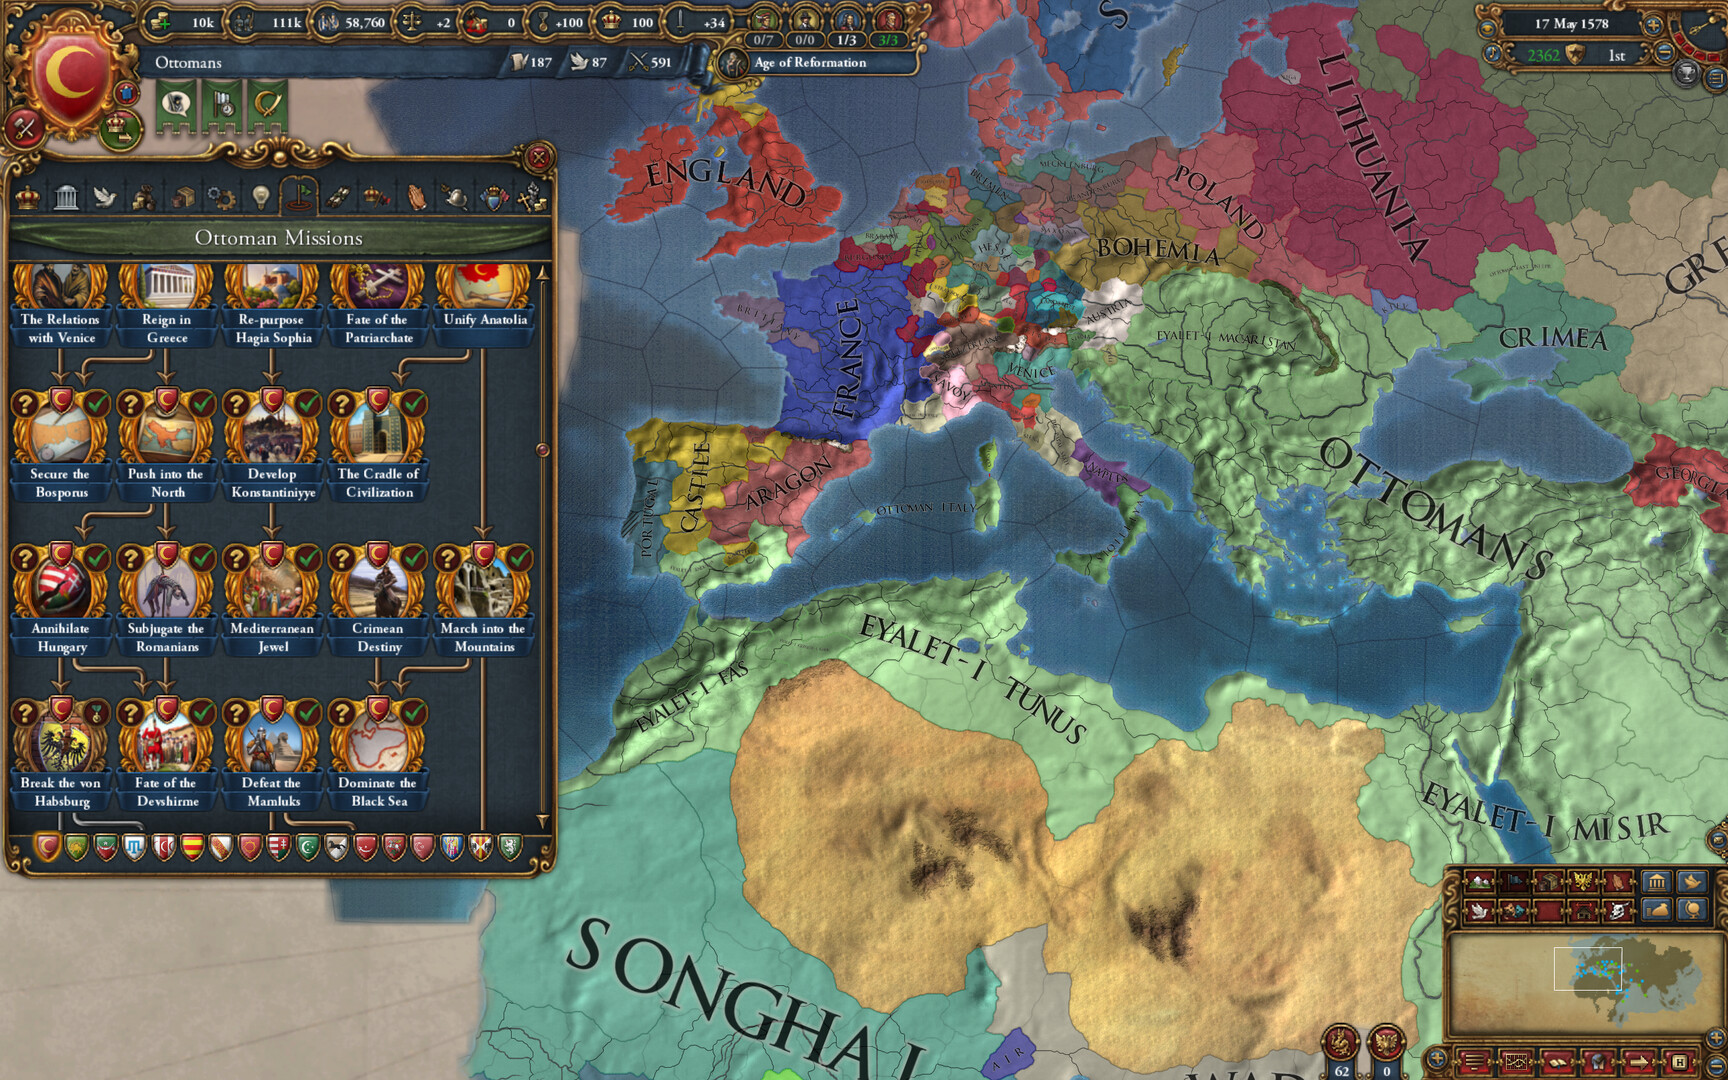 Europa Universalis 5 release date speculation, rumours, and more